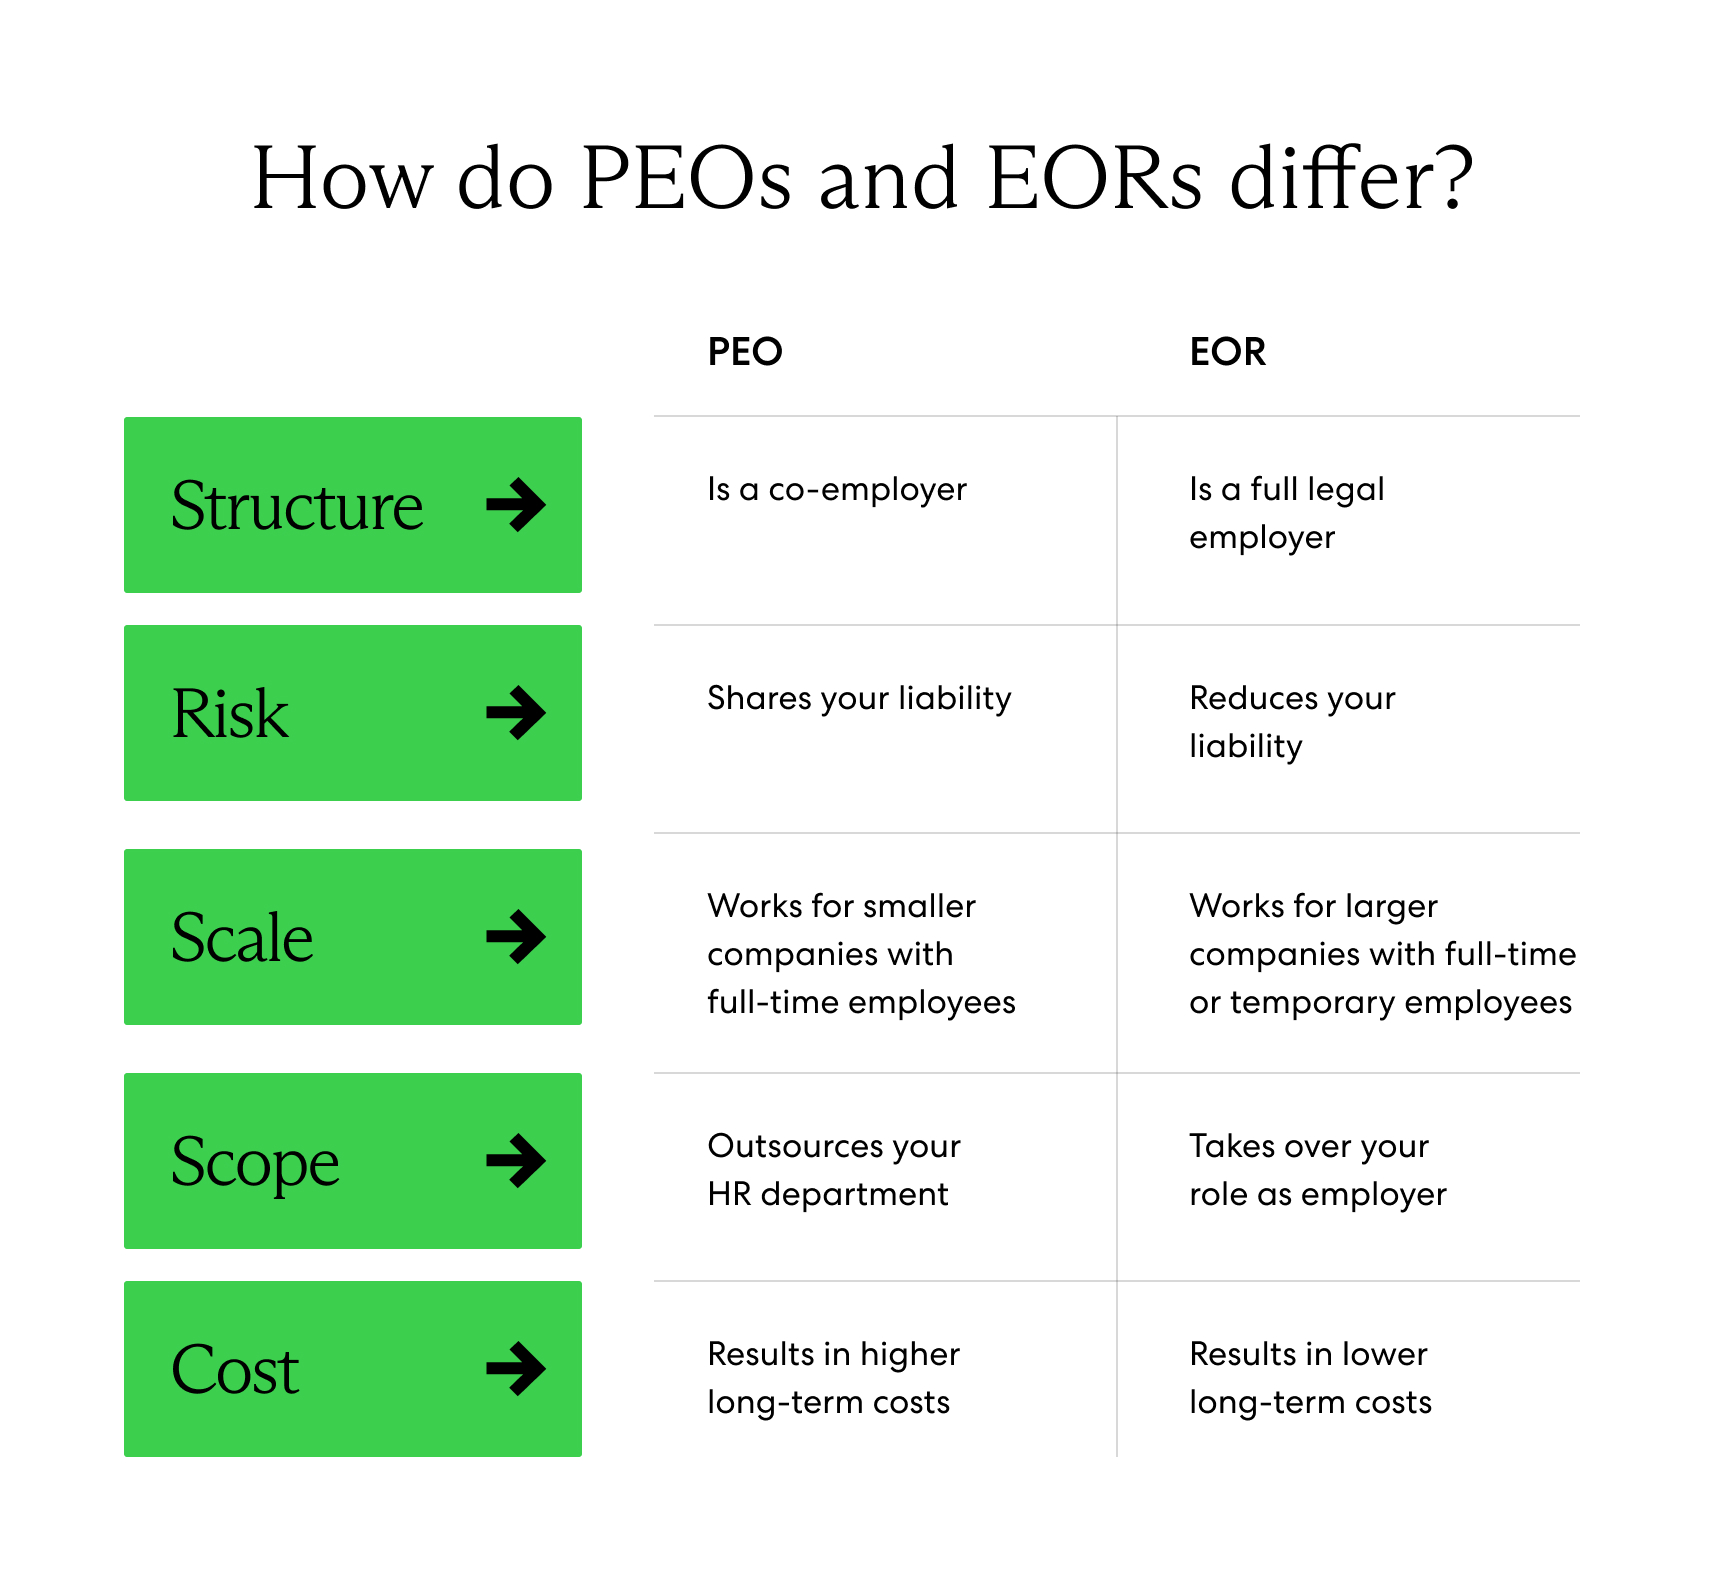 Comparing PEO vs. EOR across structure, risk, scale, scope and cost